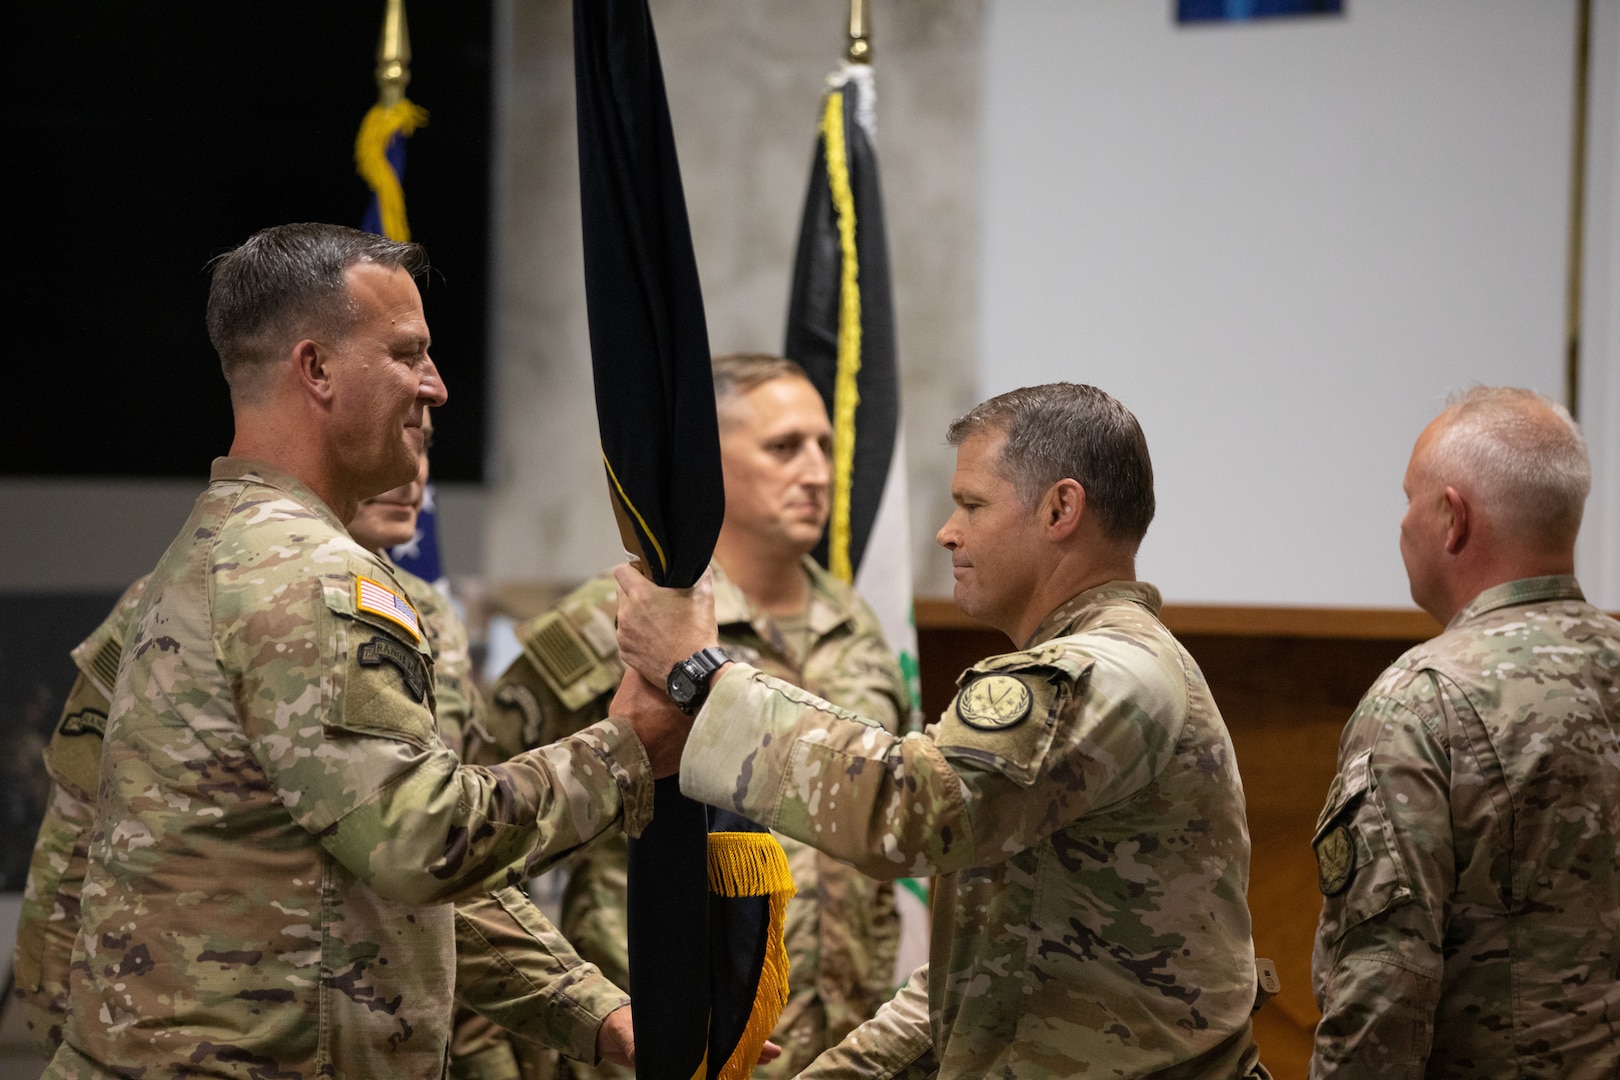 U.S. Army Gen. Michael E. Kurilla, commander of U.S. Central Command, receives the unit colors from Maj. Gen. John W. Brennan, then commanding general of Combined Joint Task Force – Operation Inherent Resolve, during a transfer of authority ceremony in Baghdad, Iraq, Sept. 8, 2022. Brennan relinquished command to Maj. Gen. Matthew McFarlane. (U.S. Army photo by Sgt. Julio Hernandez)